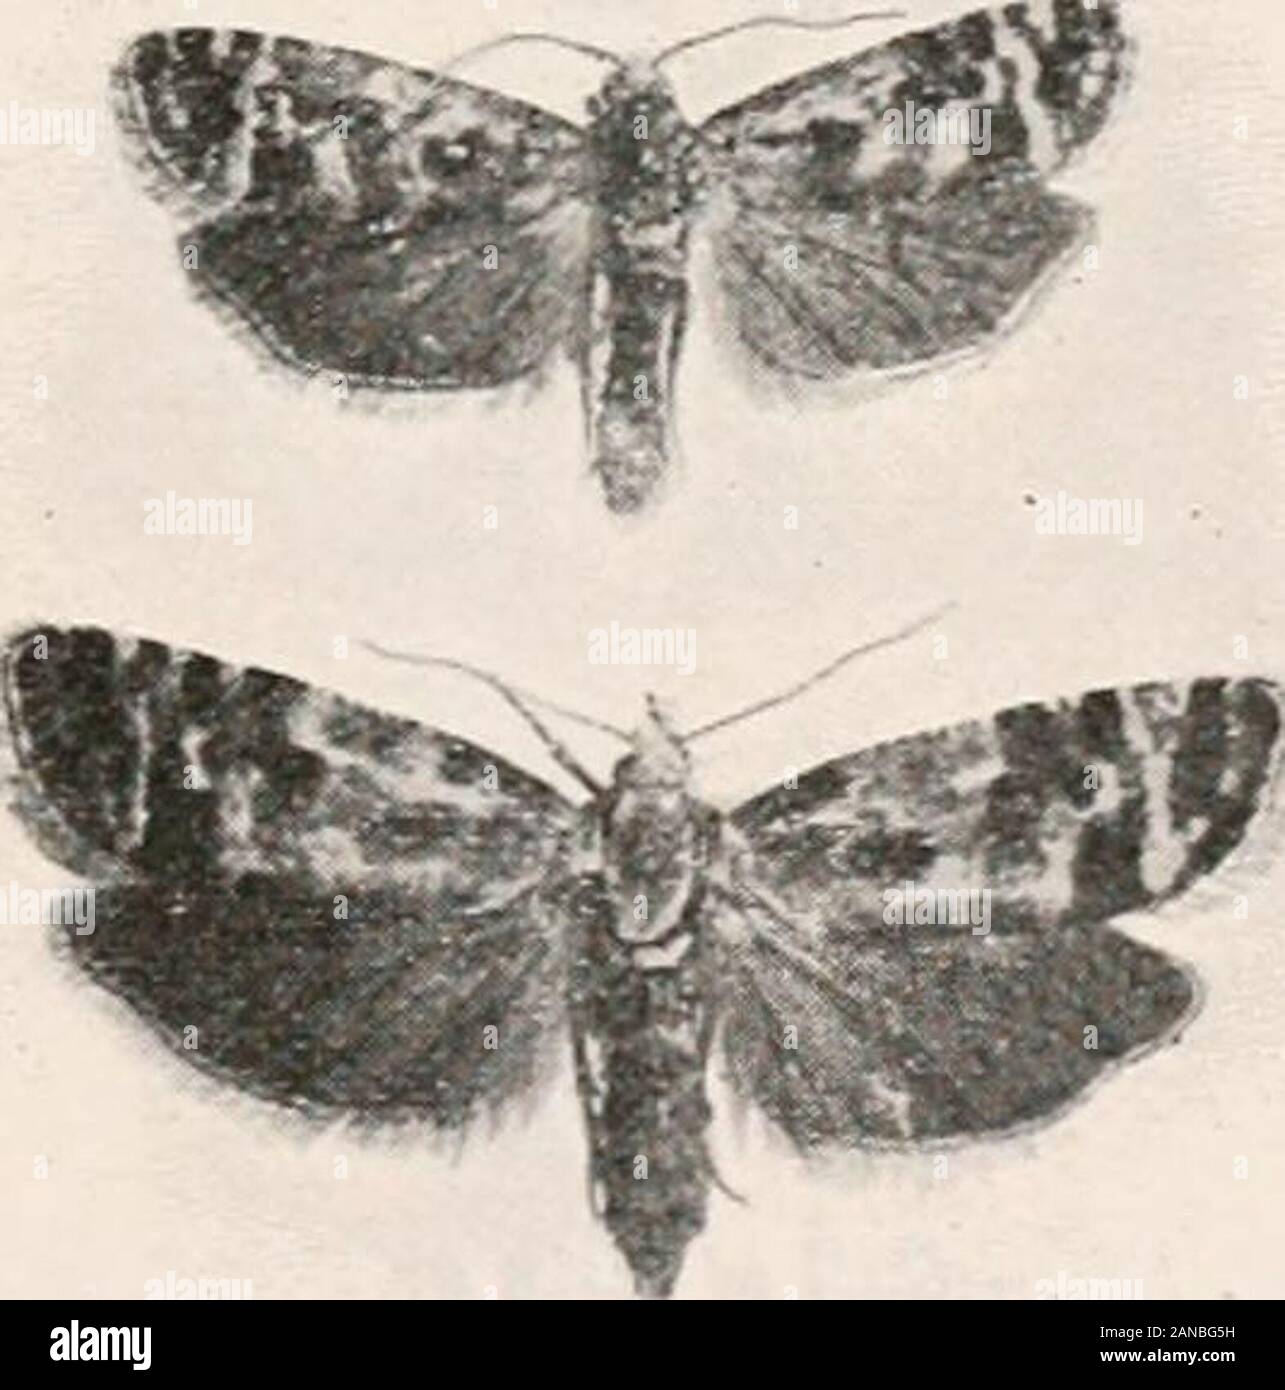 Forest entomology . Fig. 254.—Leading bud of Scot* pi/ntinjured by larva of Retinia turionana. Fig. 255.— Leading shoot of young Scots pineinjured by larva of Retinia buoliana. by the larva. Fig. 255 represents a photograph taken from a two-year Scots pine plant in the nursery-line. The affected shoot, whichcontains a single larva, is lying to theright, and the normal shoots are veryvigorous, but they are not shown infull length. In addition to injuriesbeing done in nursery-lines, we oftenfind young Scots pines and Austrianpines from six to ten years of agevery much destroyed by this species.A Stock Photo